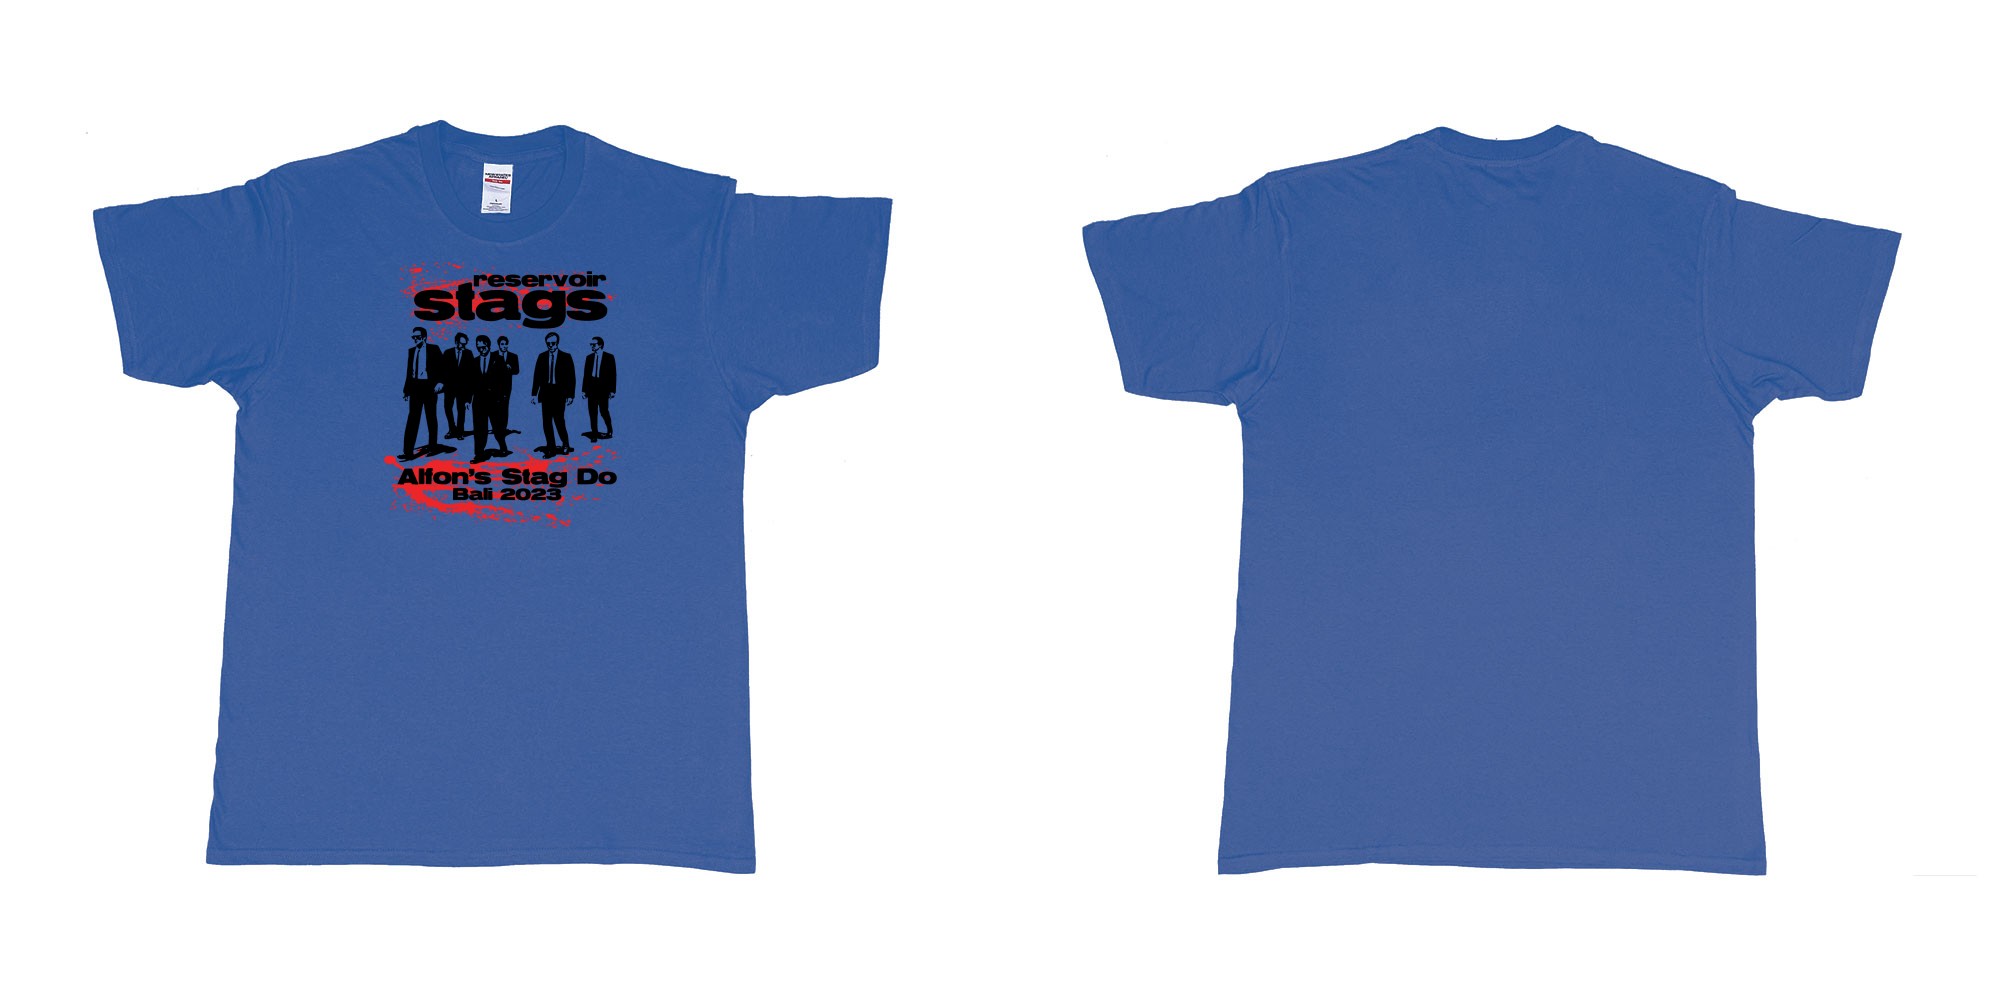 Custom tshirt design Reservoir Dogs Stag in fabric color royal-blue choice your own text made in Bali by The Pirate Way